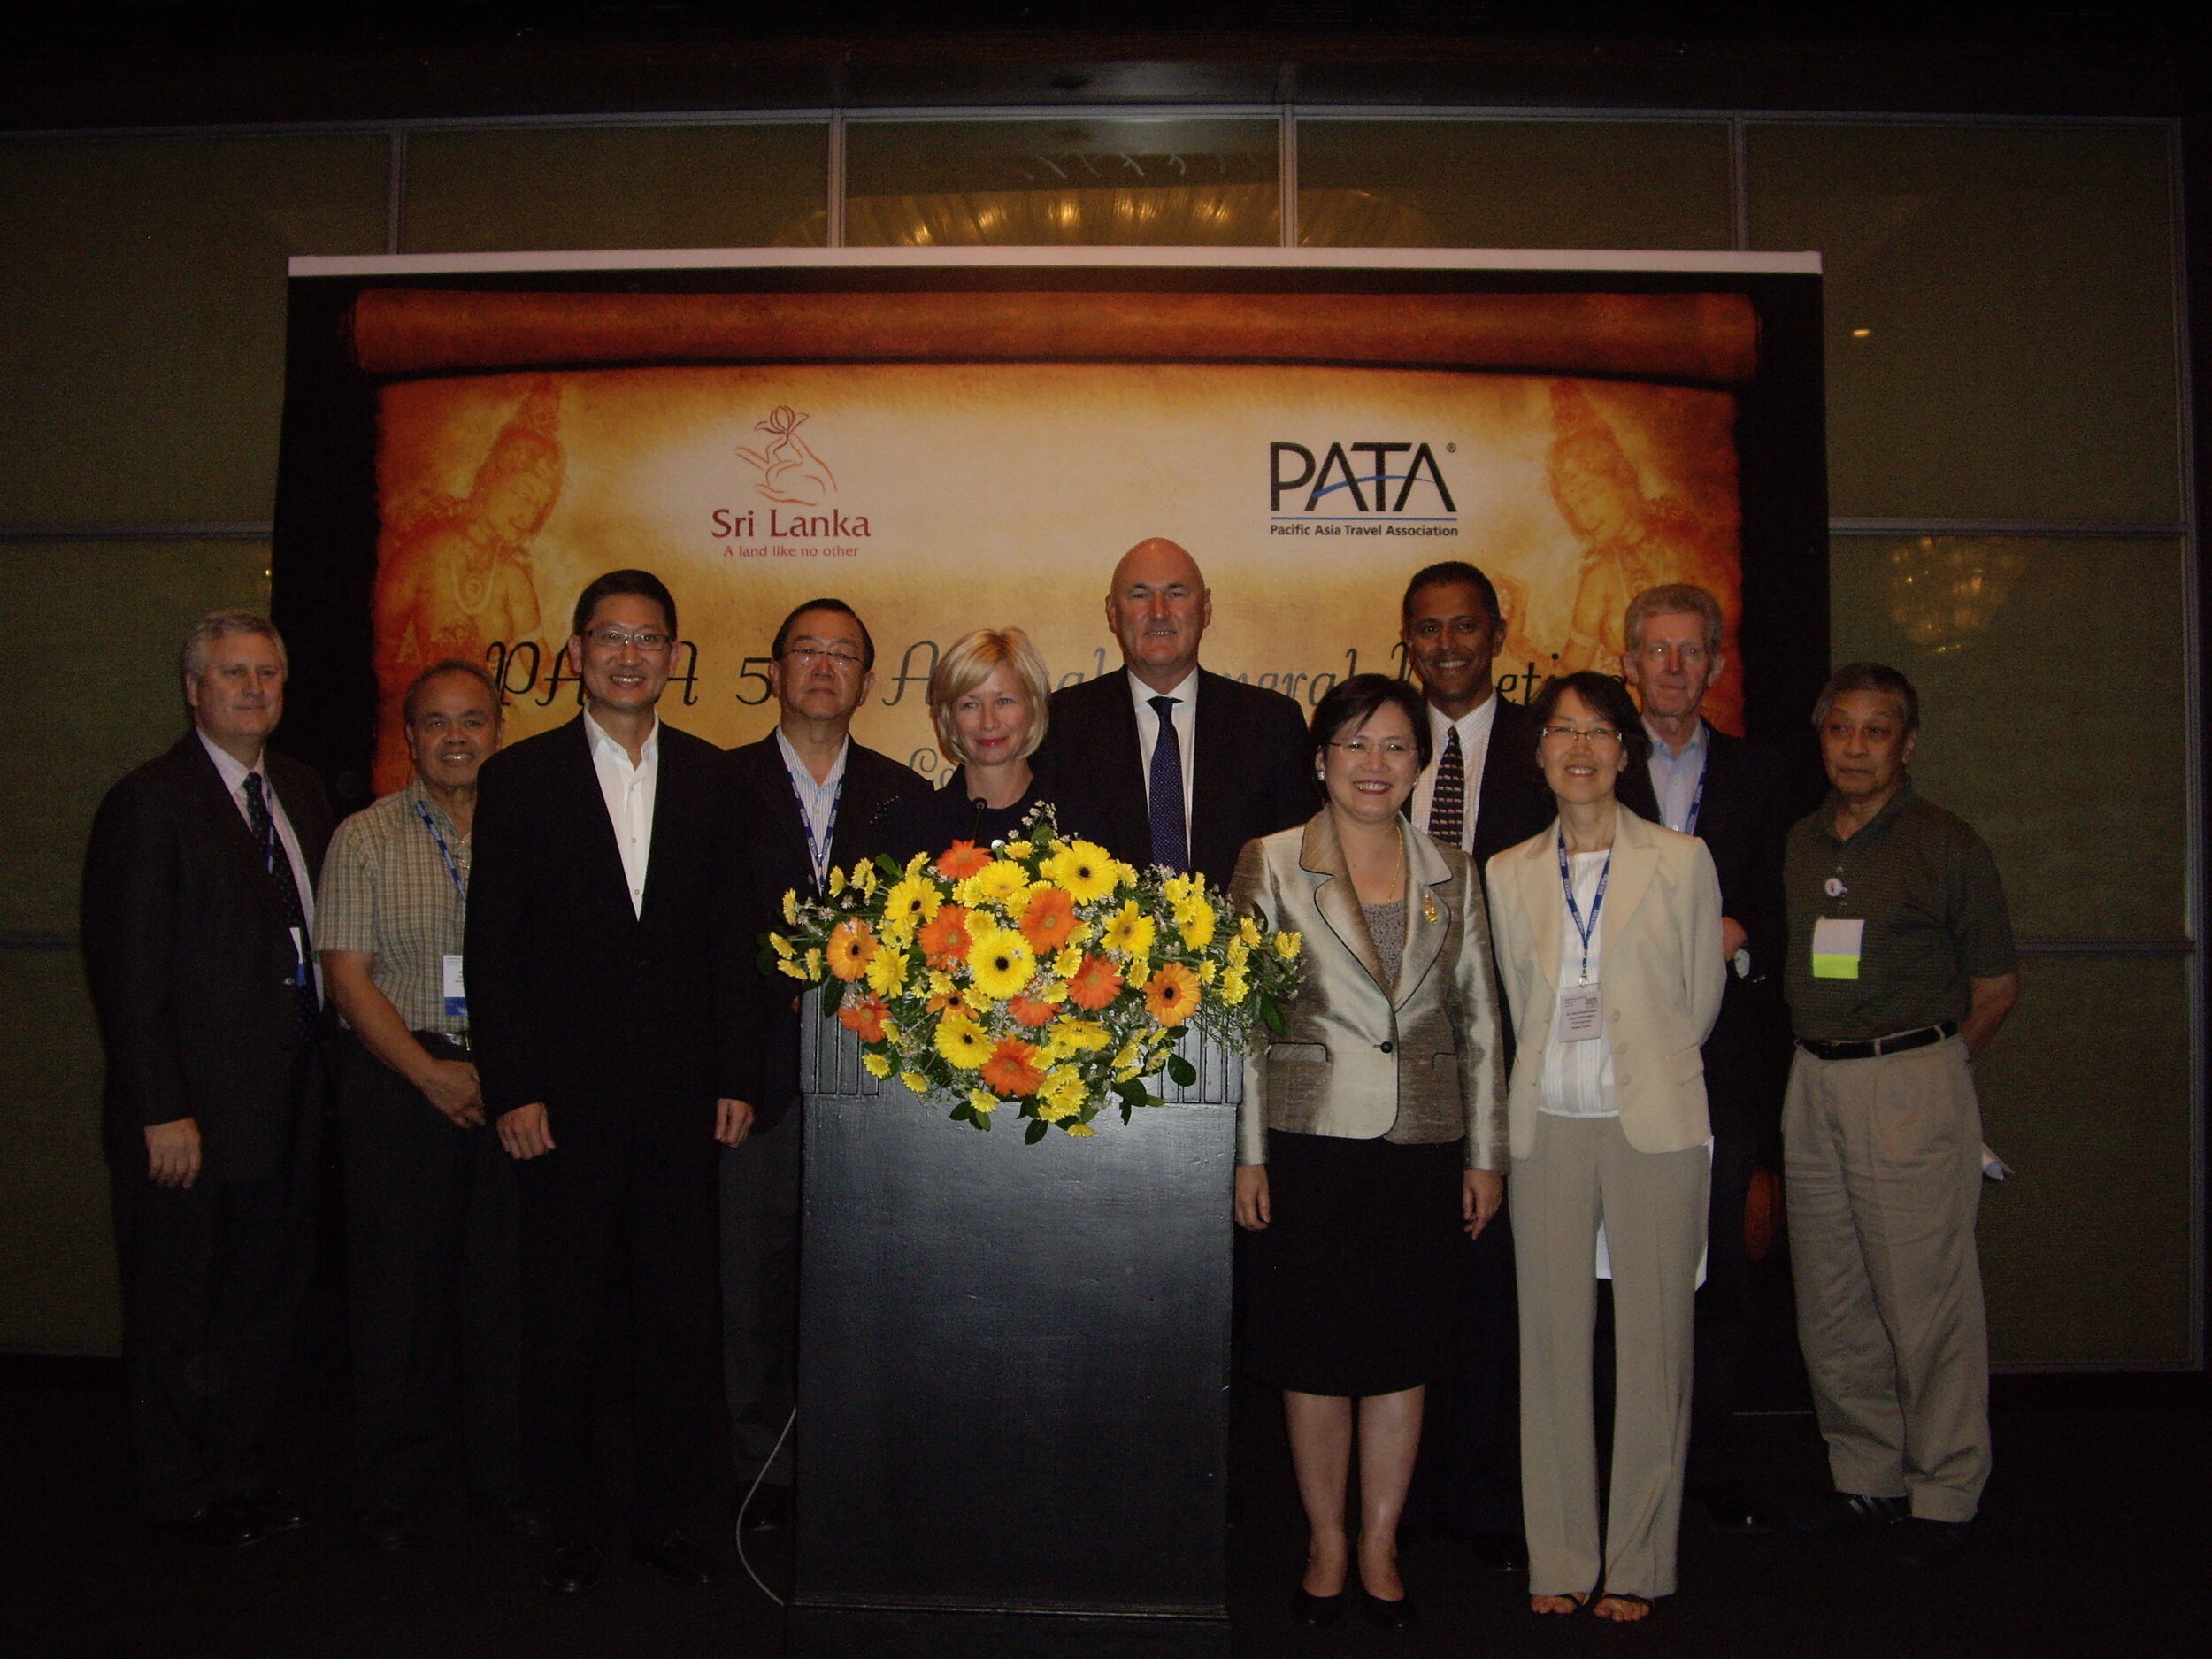 Phornsiri Manoharn with the new PATA Executive Committee team at the PATA 57th Annual General Meeting in Colombo, Sri Lanka.